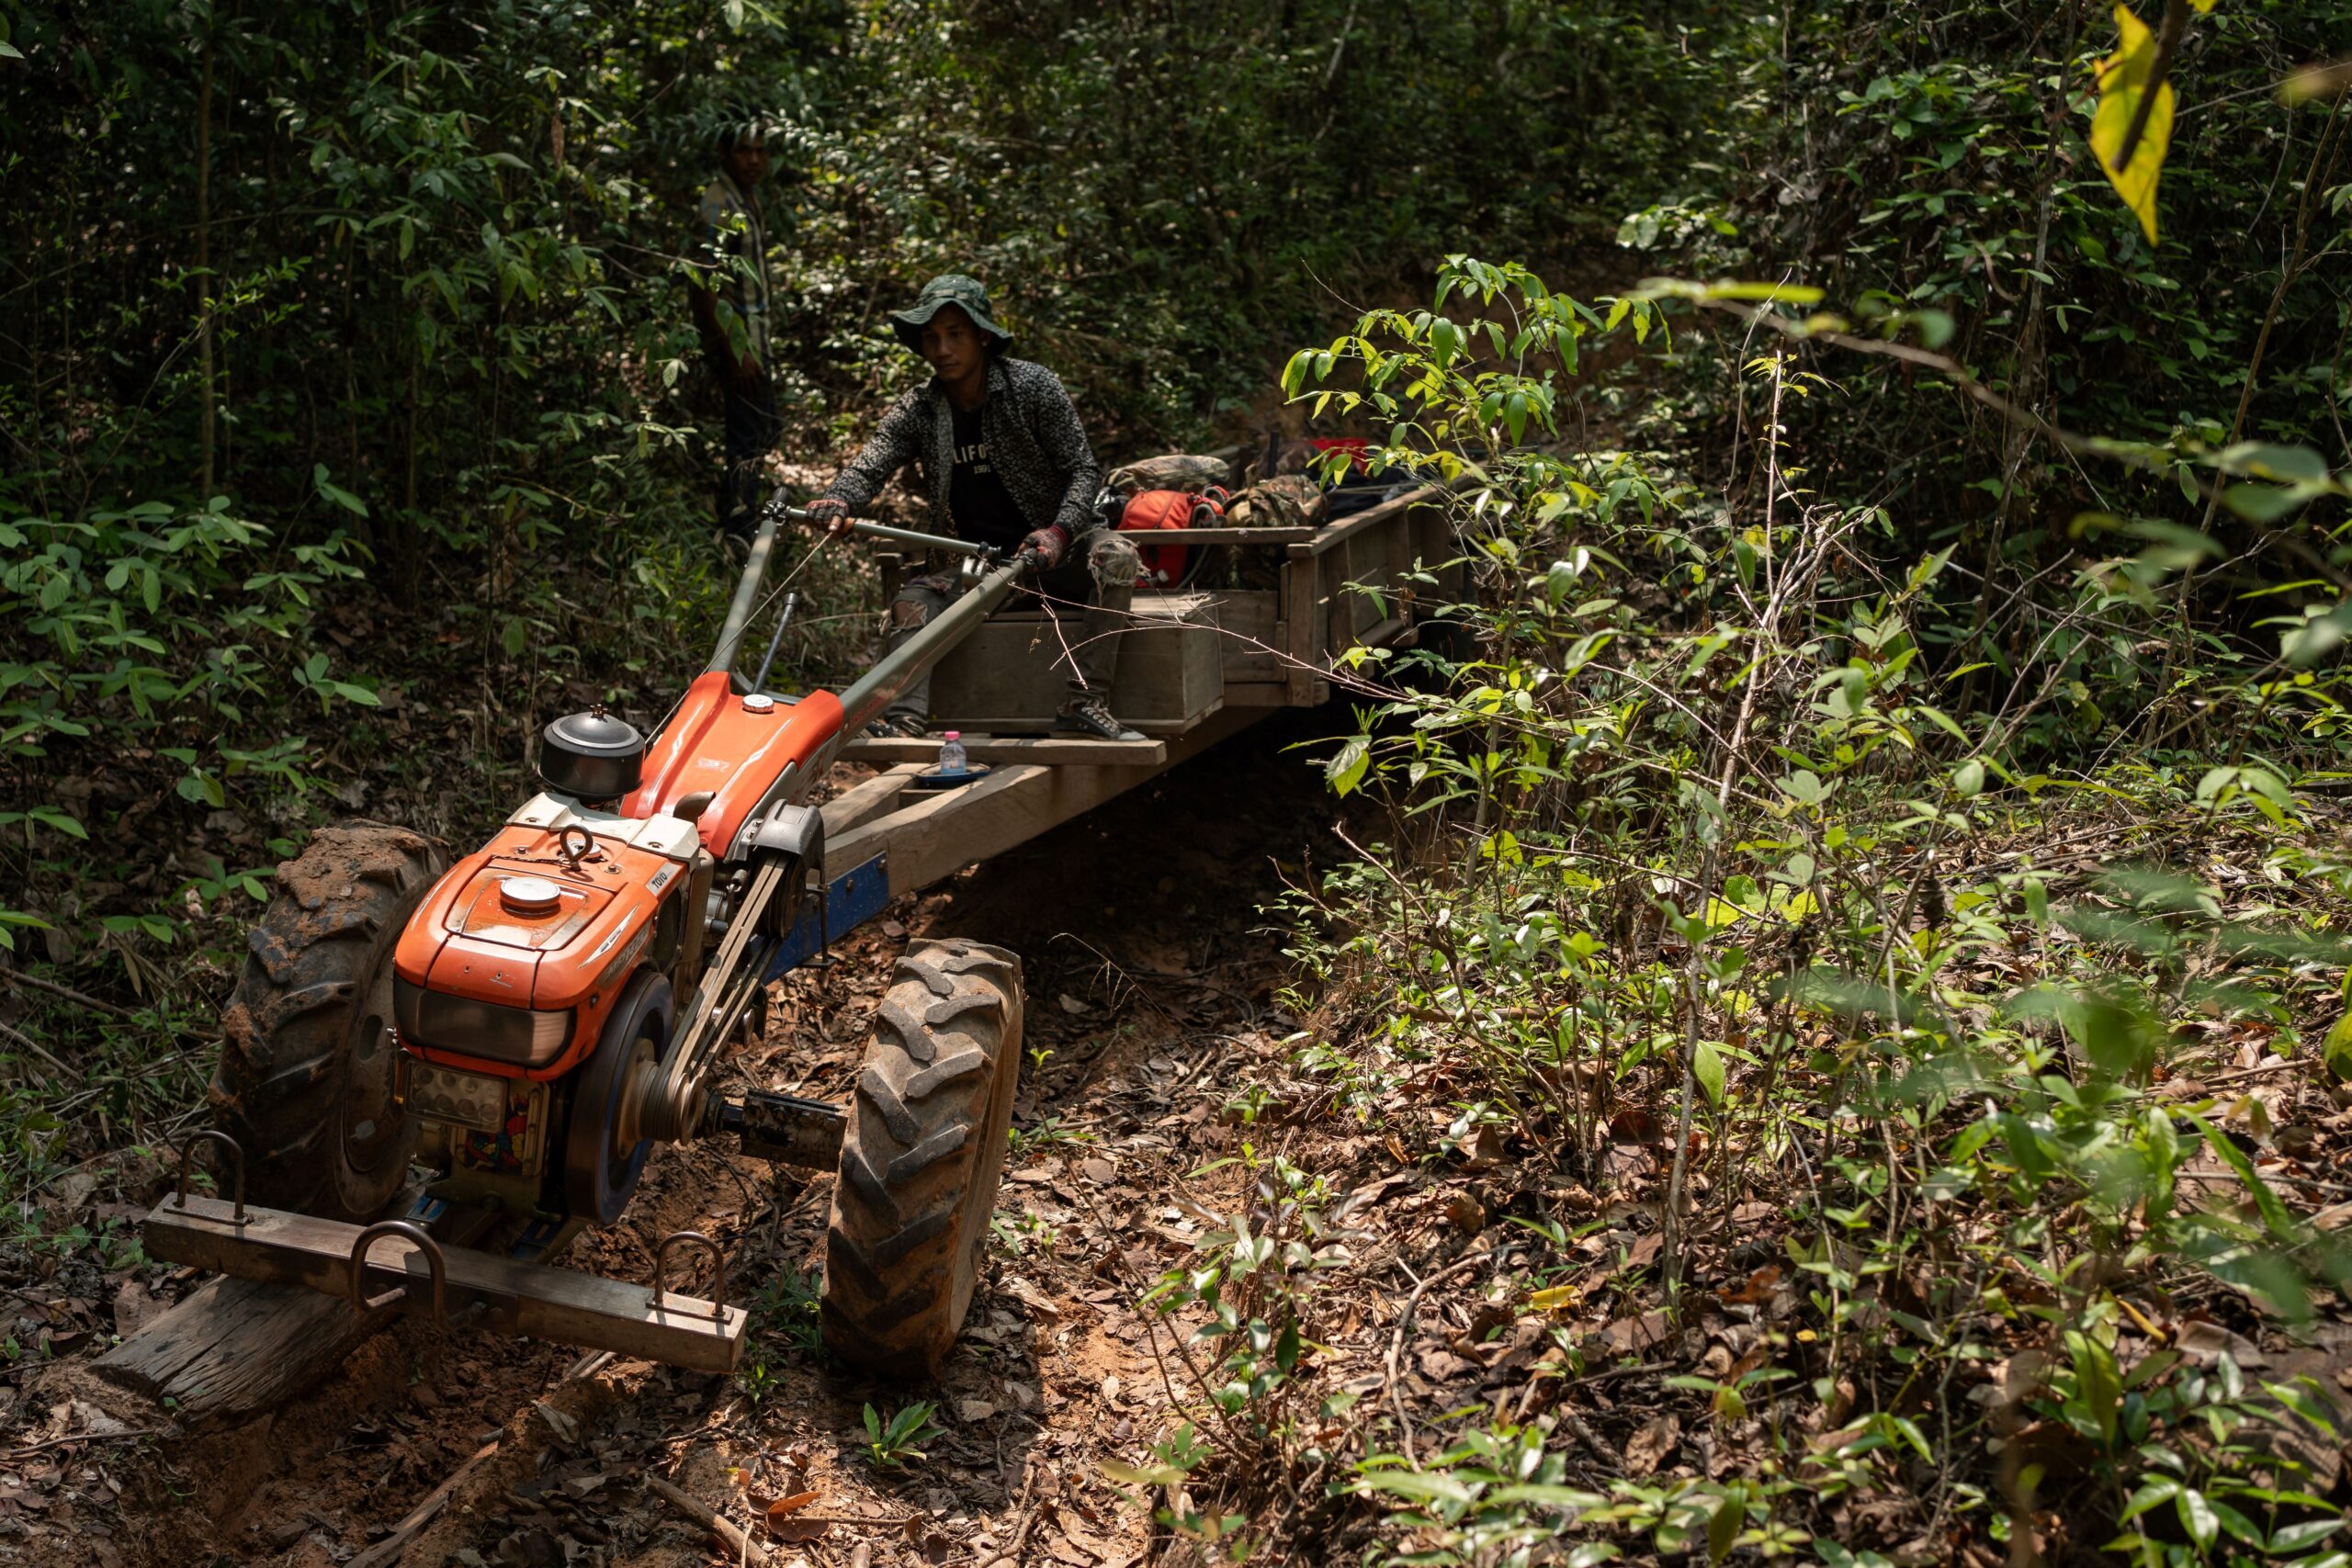 A member of the Prey Preah Roka Community Network leads the patrol convoy, carrying supplies on a koy-yun. Image by Andy Ball / Mongabay.